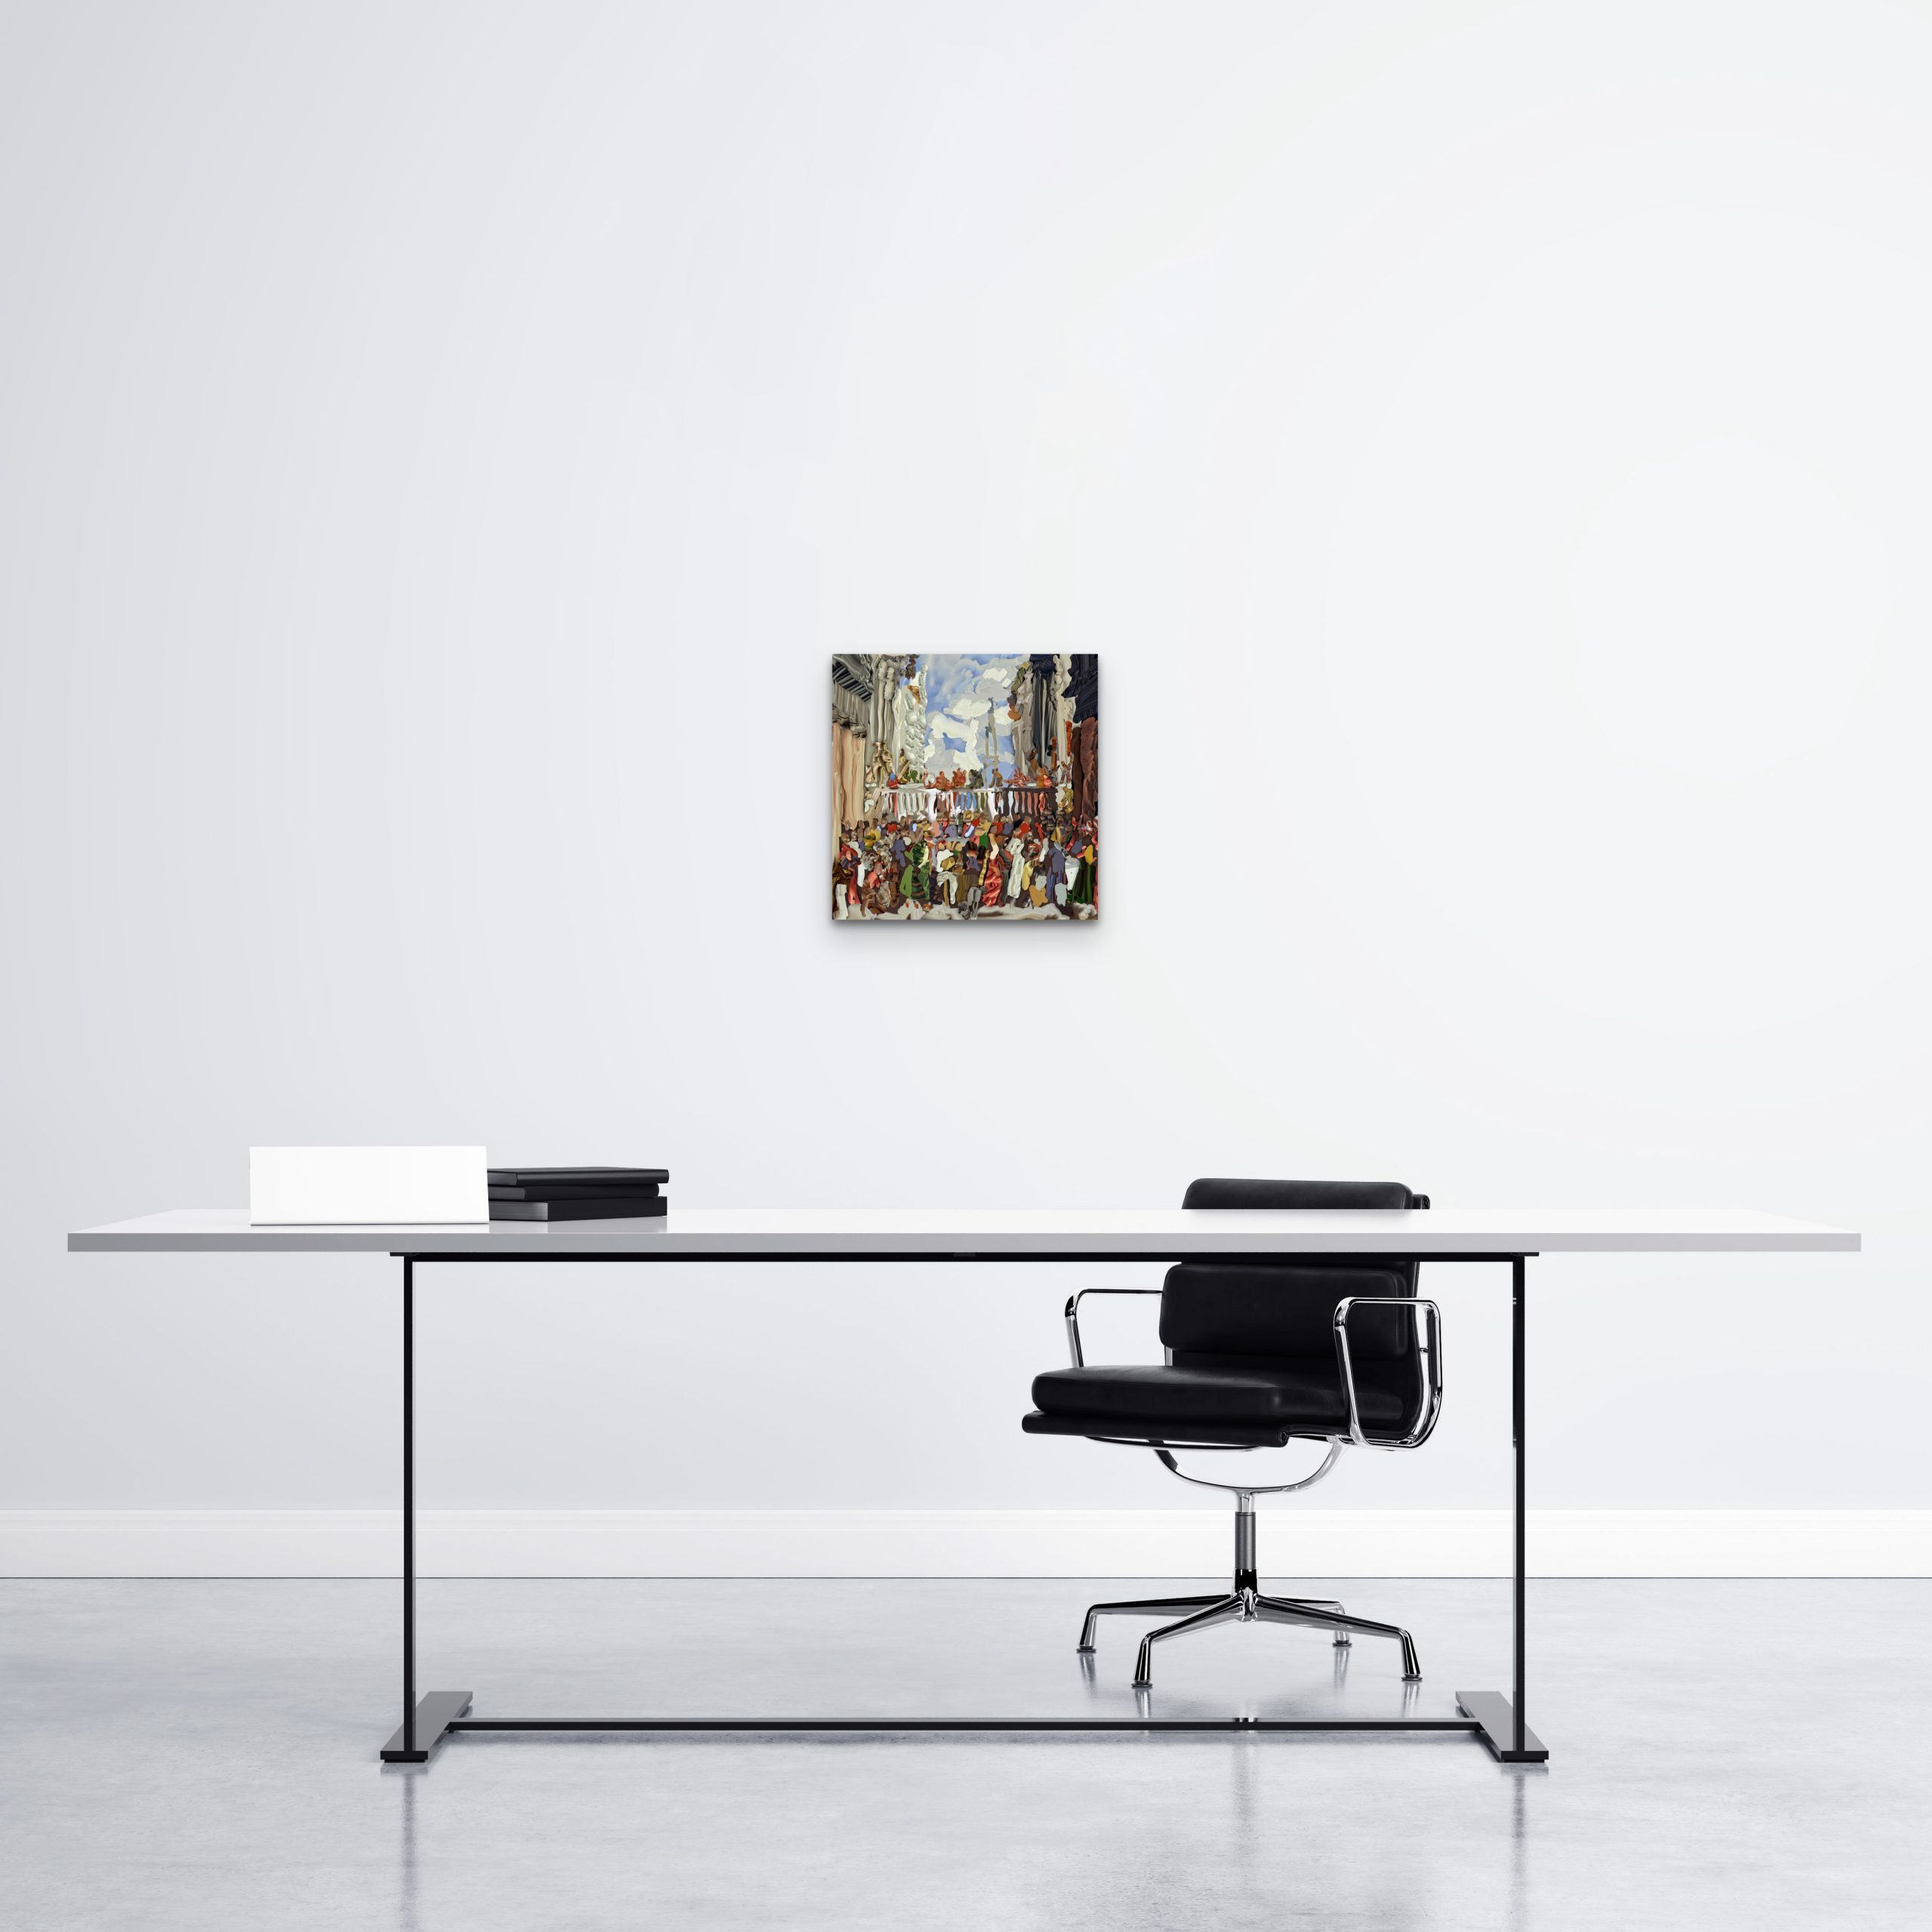 An artwork measuring 12 x 12 inches displayed in an office setting. The colorful piece adds a touch of creativity and vibrancy to the workspace, enhancing the overall aesthetic appeal.